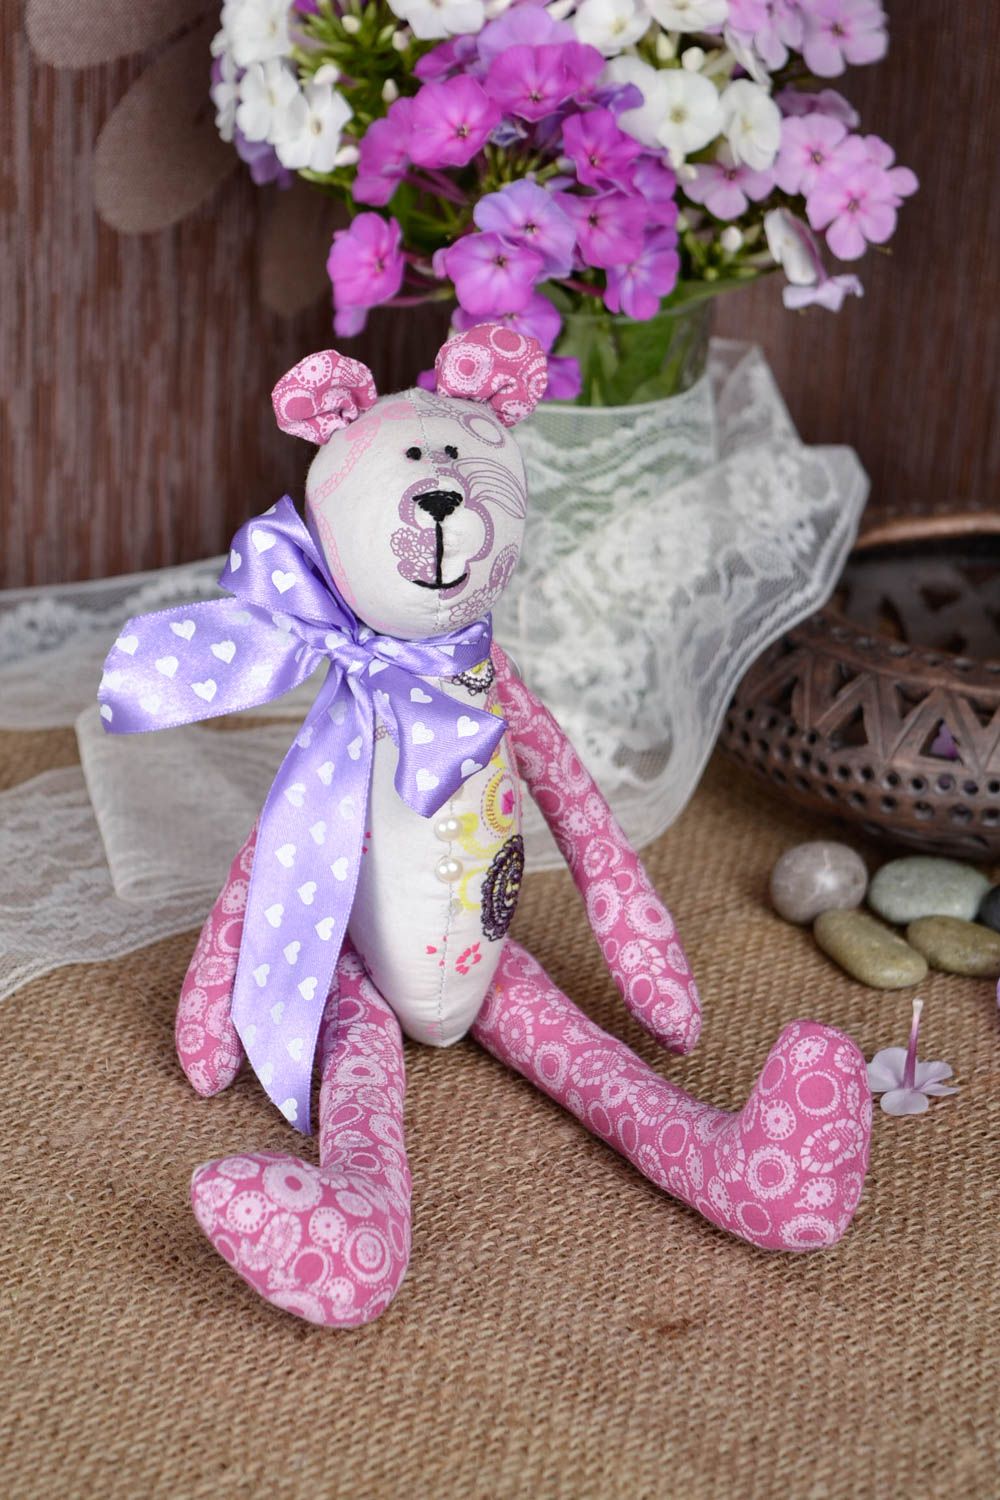 Handmade toy soft toy bear toy gifts for girl interior decorations souvenir idea photo 1